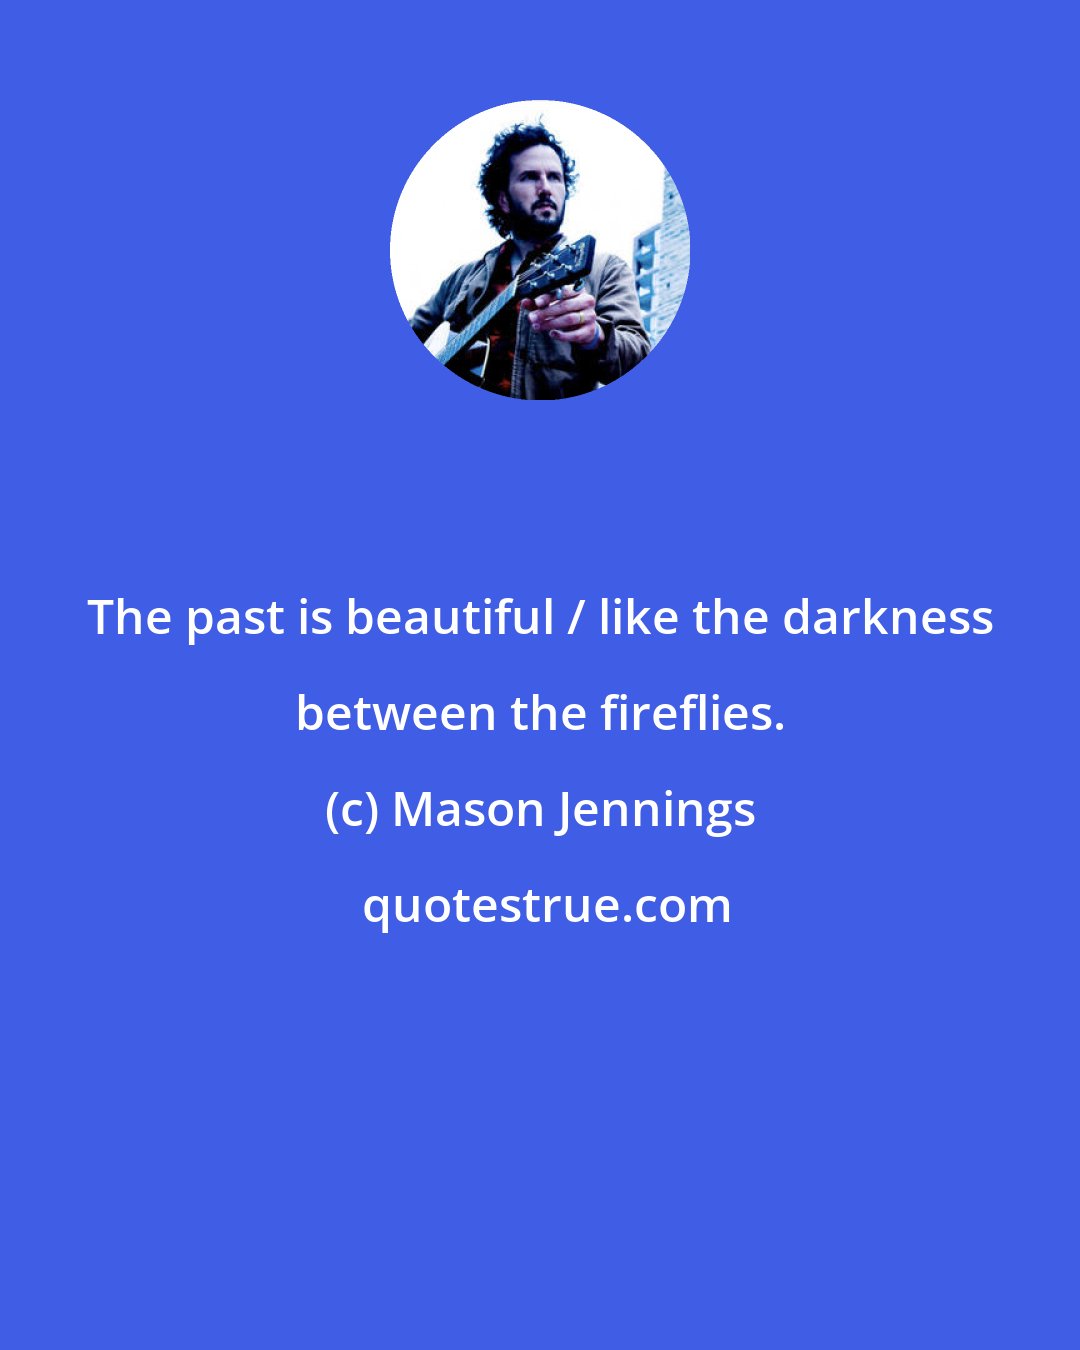 Mason Jennings: The past is beautiful / like the darkness between the fireflies.